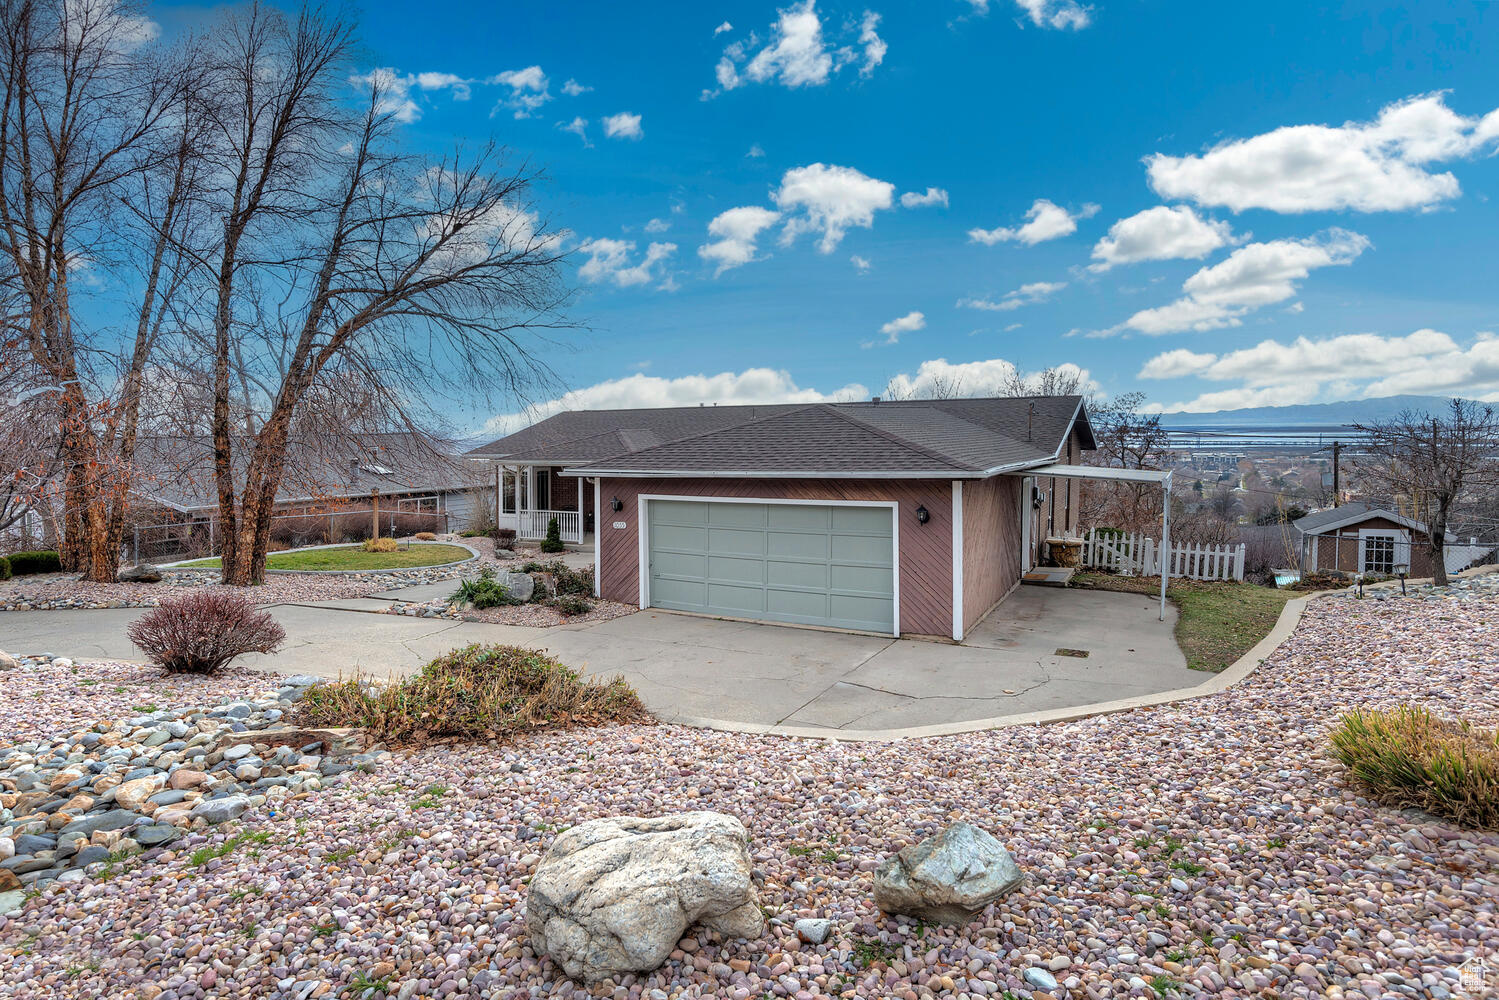 1055 N 500 E, Centerville, Utah 84014, 5 Bedrooms Bedrooms, 18 Rooms Rooms,3 BathroomsBathrooms,Residential,For sale,500,1986049